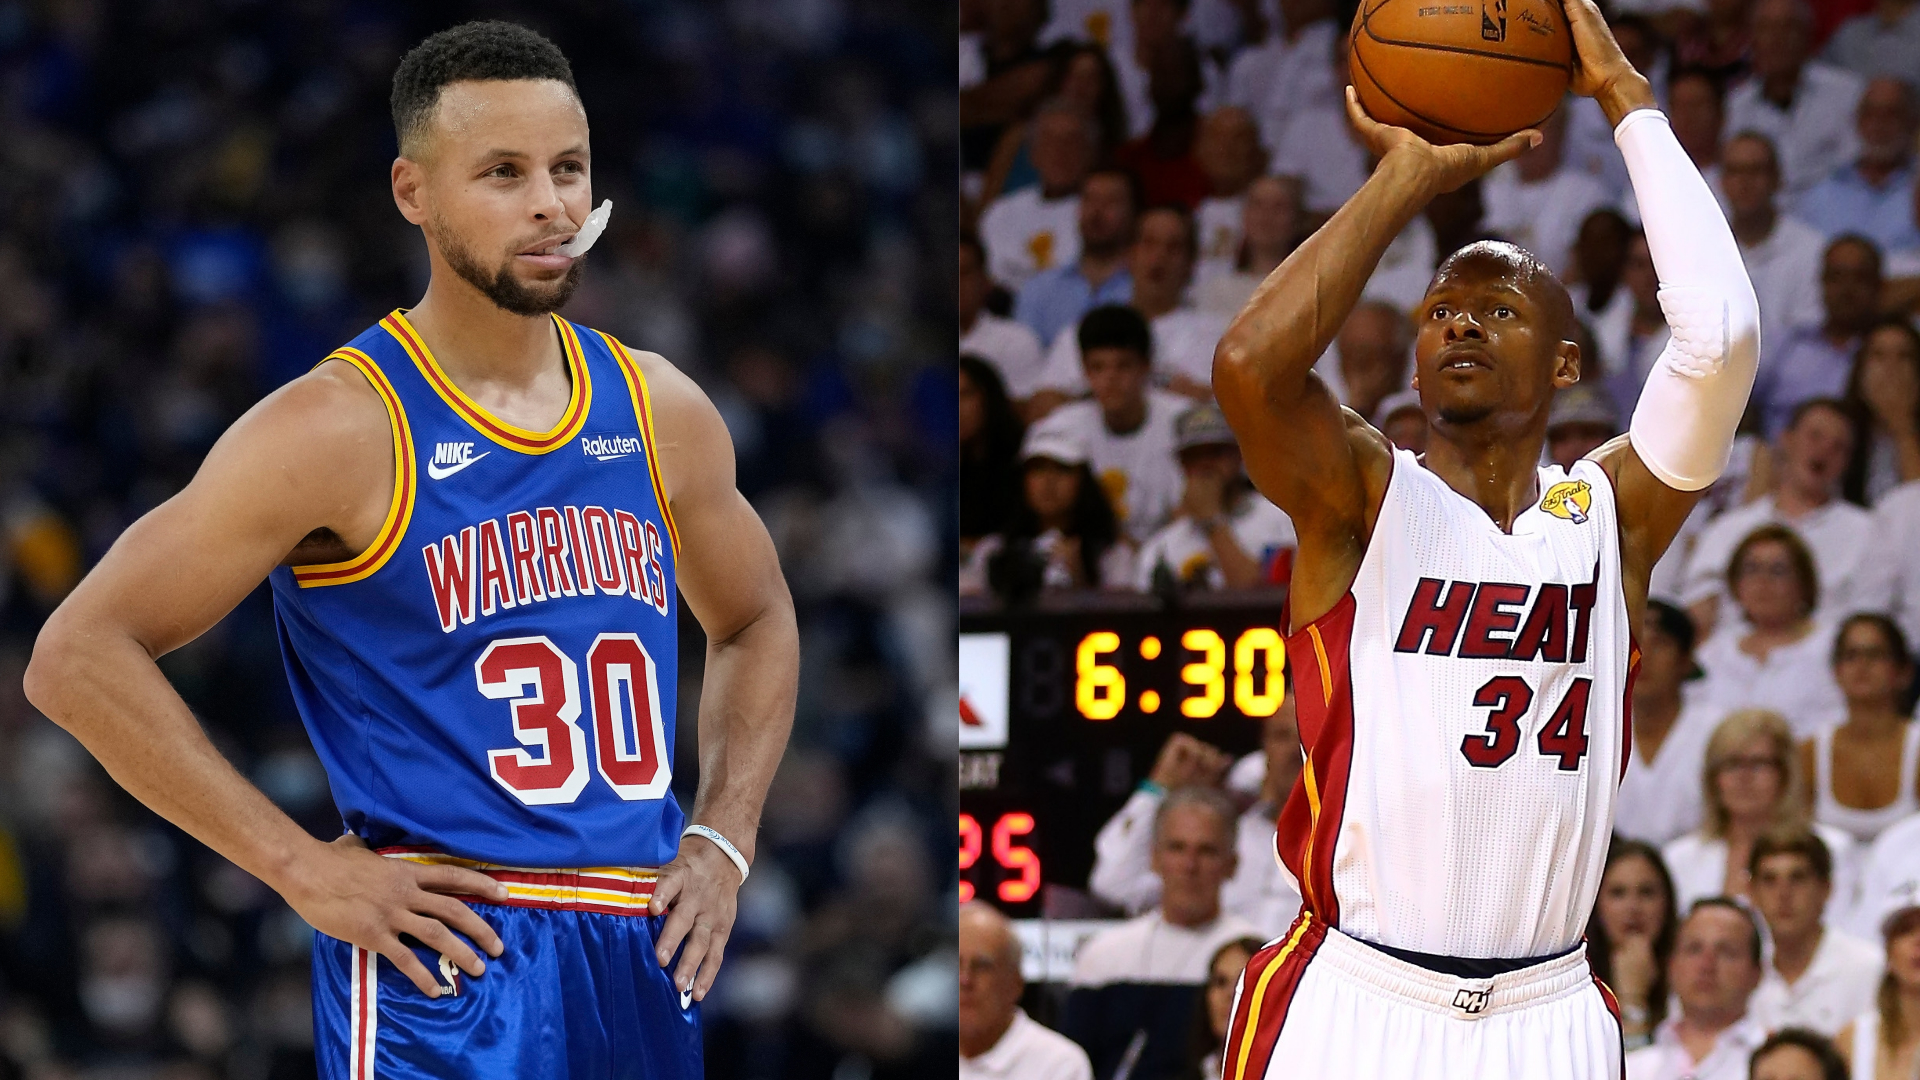 When will Stephen Curry pass Ray Allen for most made 3-pointers in NBA history?